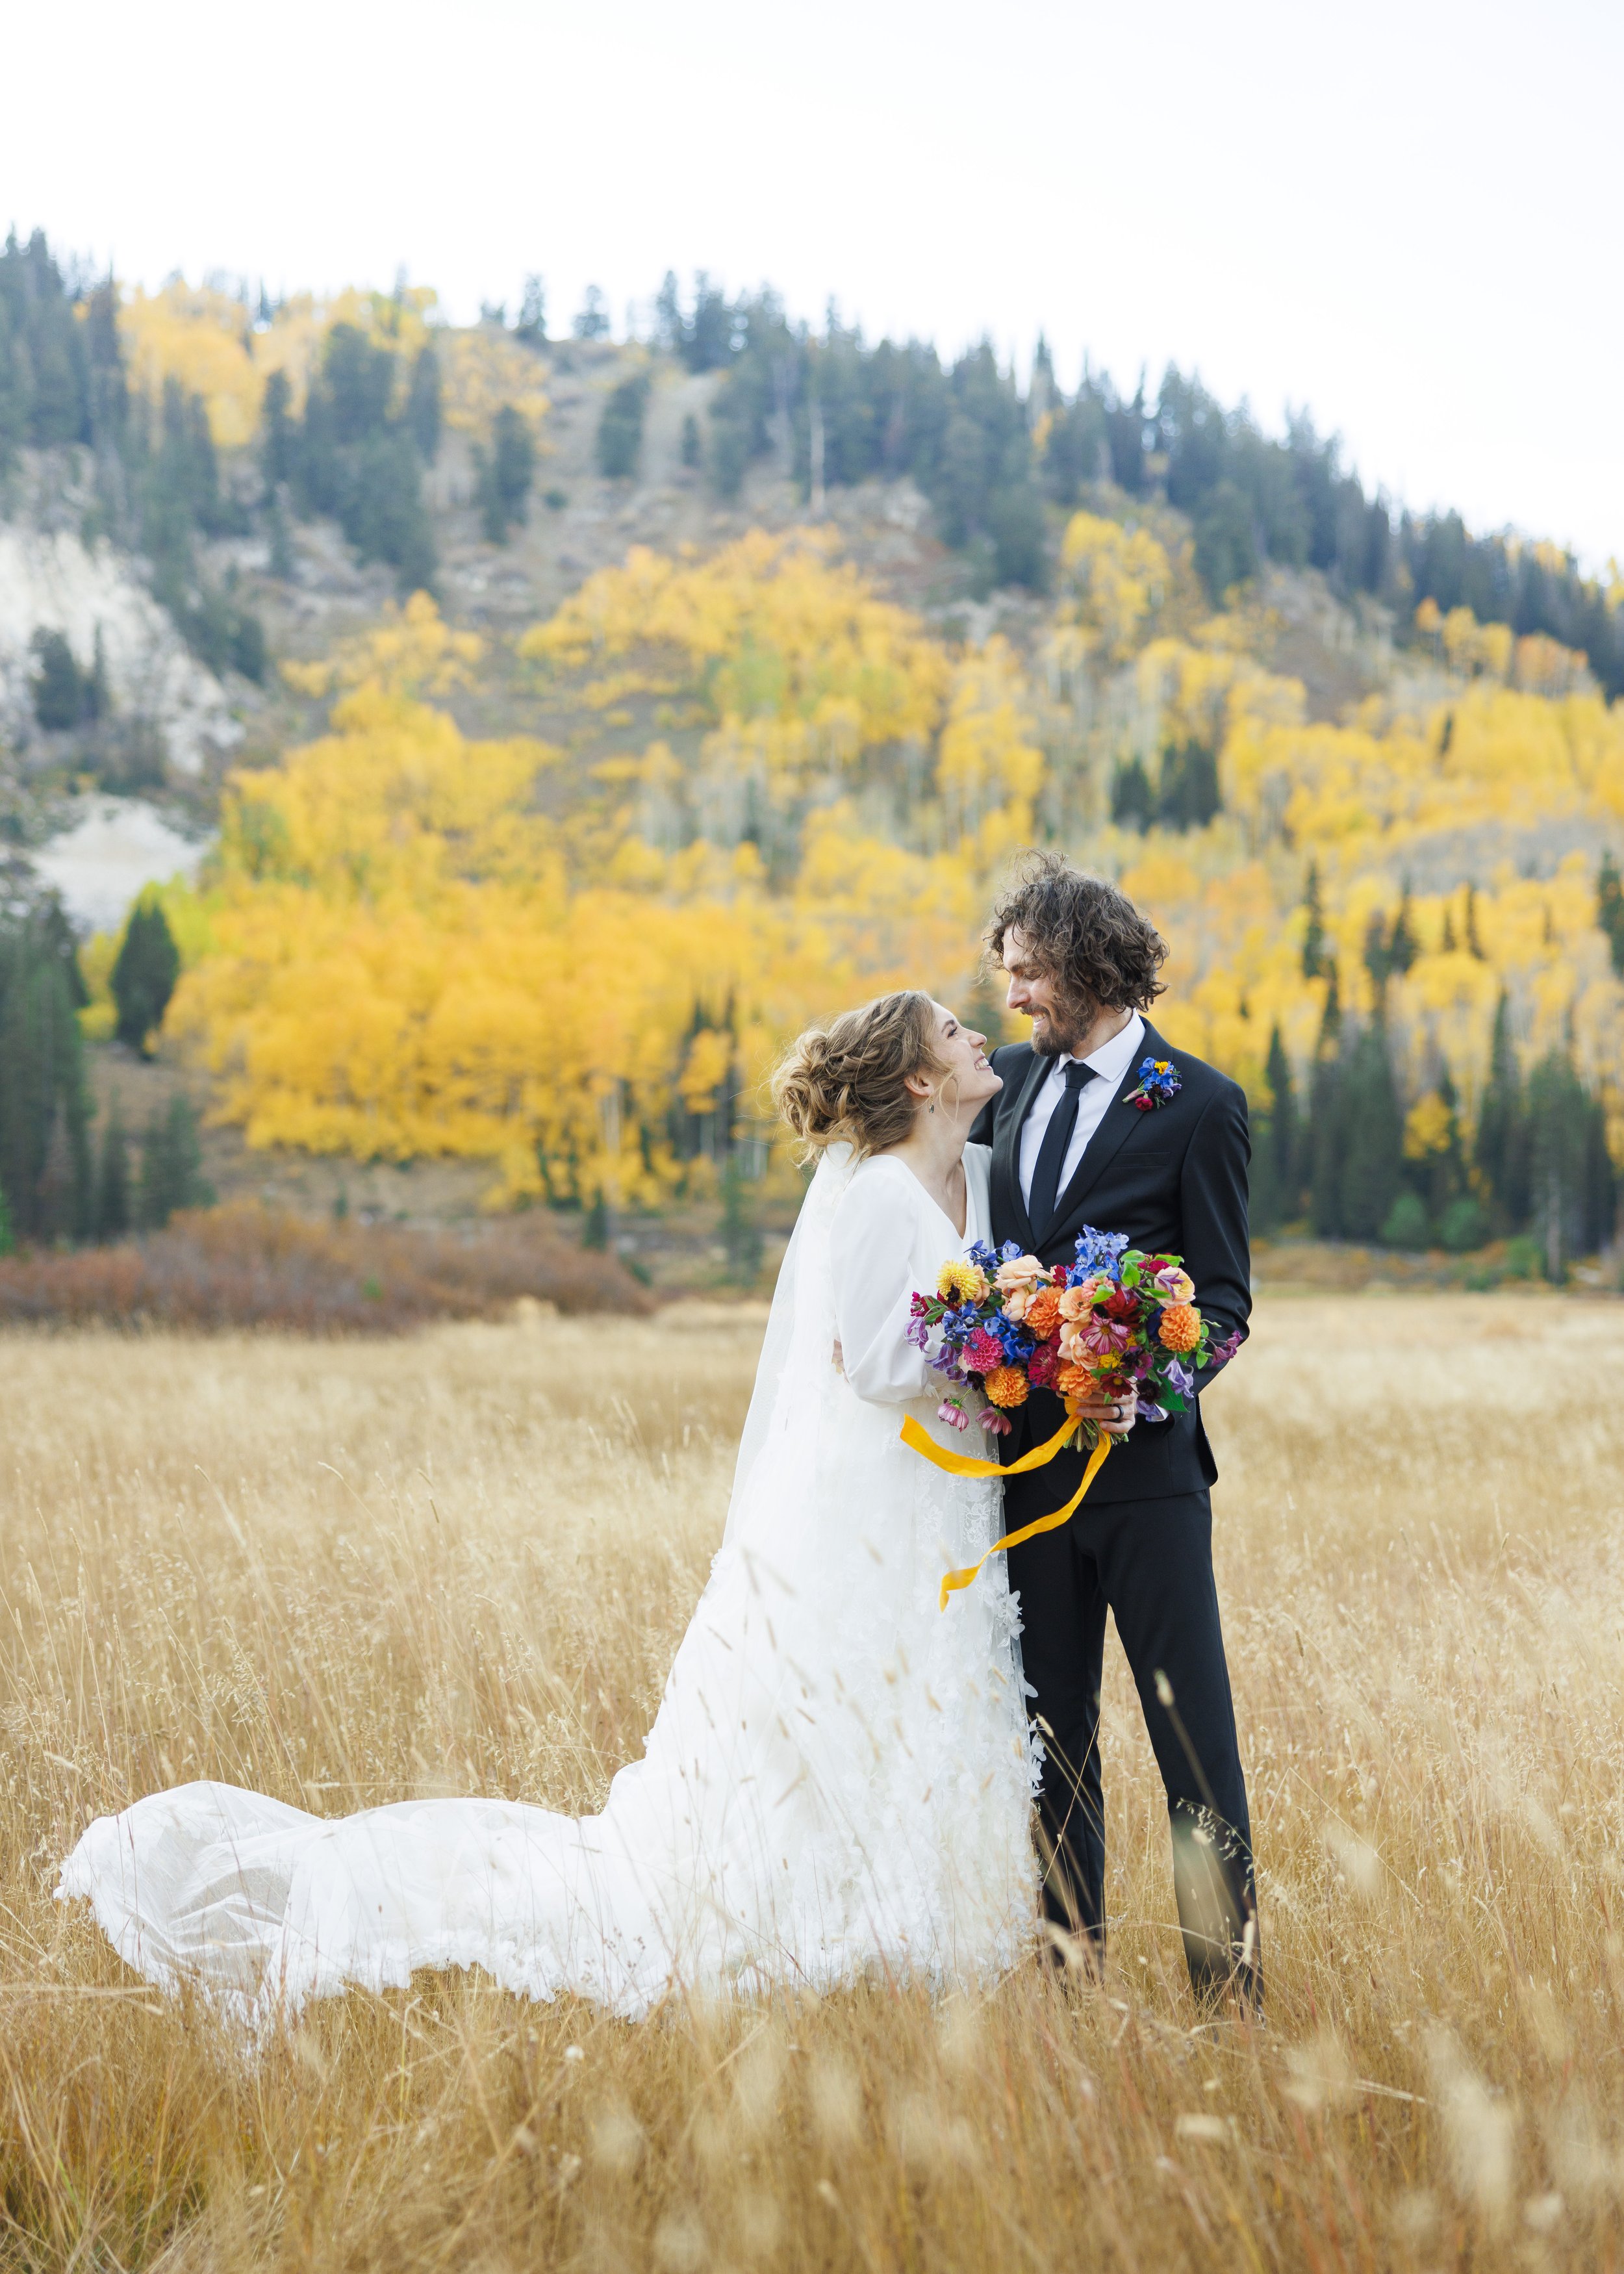  With fall leaves behind them standing in a yellow grass field bride and groom smile by Savanna Richardson Photography. fall UT Wedding #SavannaRichardsonPhotography #SavannaRichardsonFormals #CottonwoodCanyon #WeddingFormals #SLCWedding #fallwed 